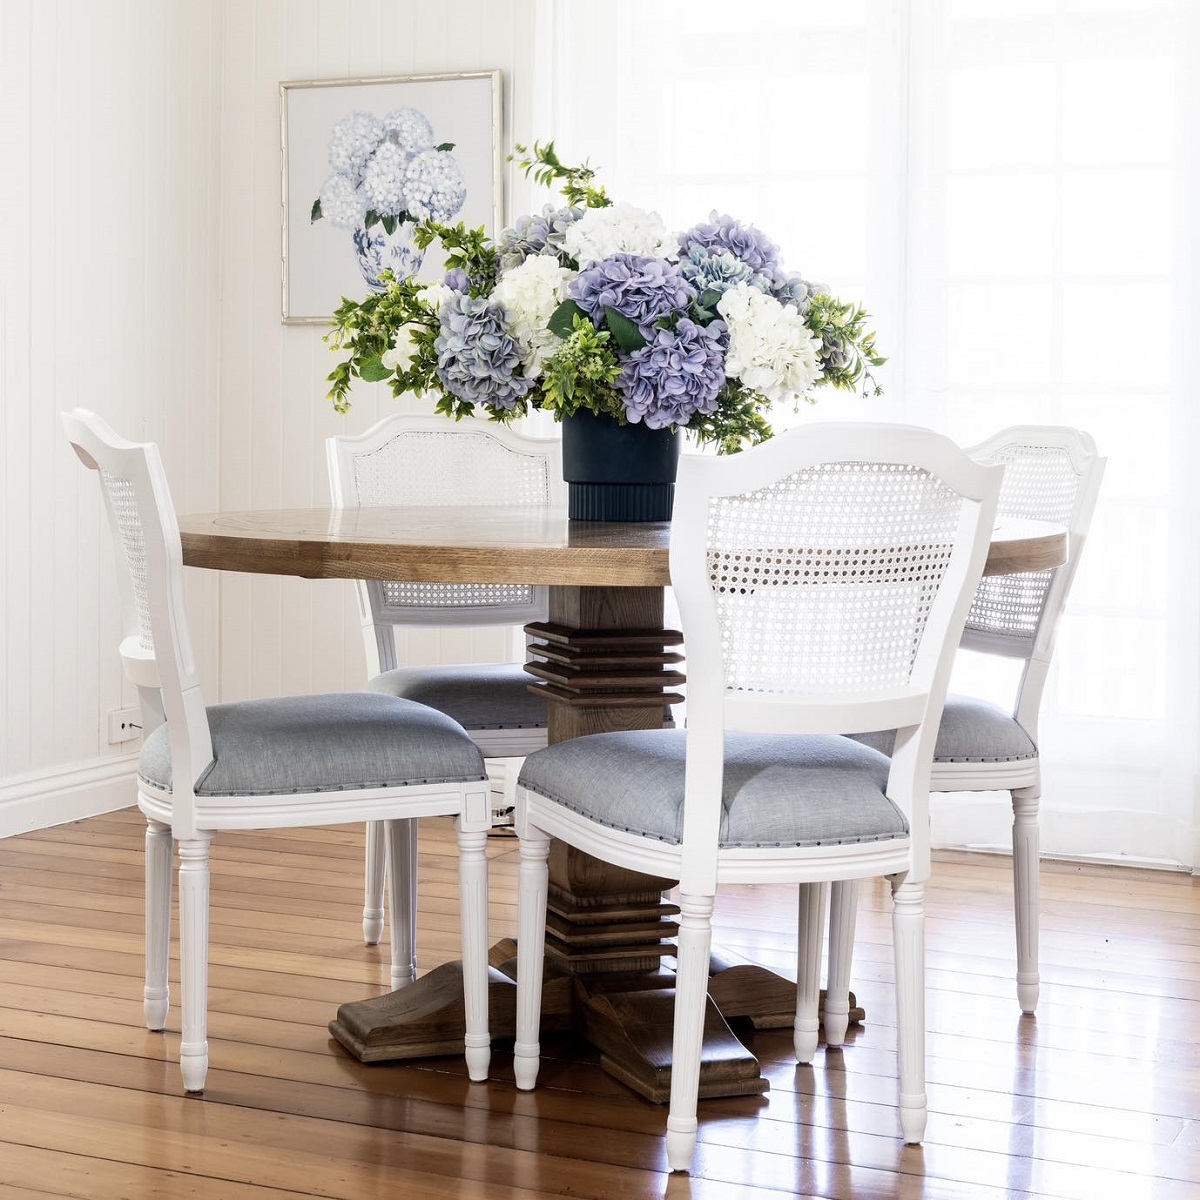 Choosing the Perfect Coastal-Style Dining Table – Daily Spark